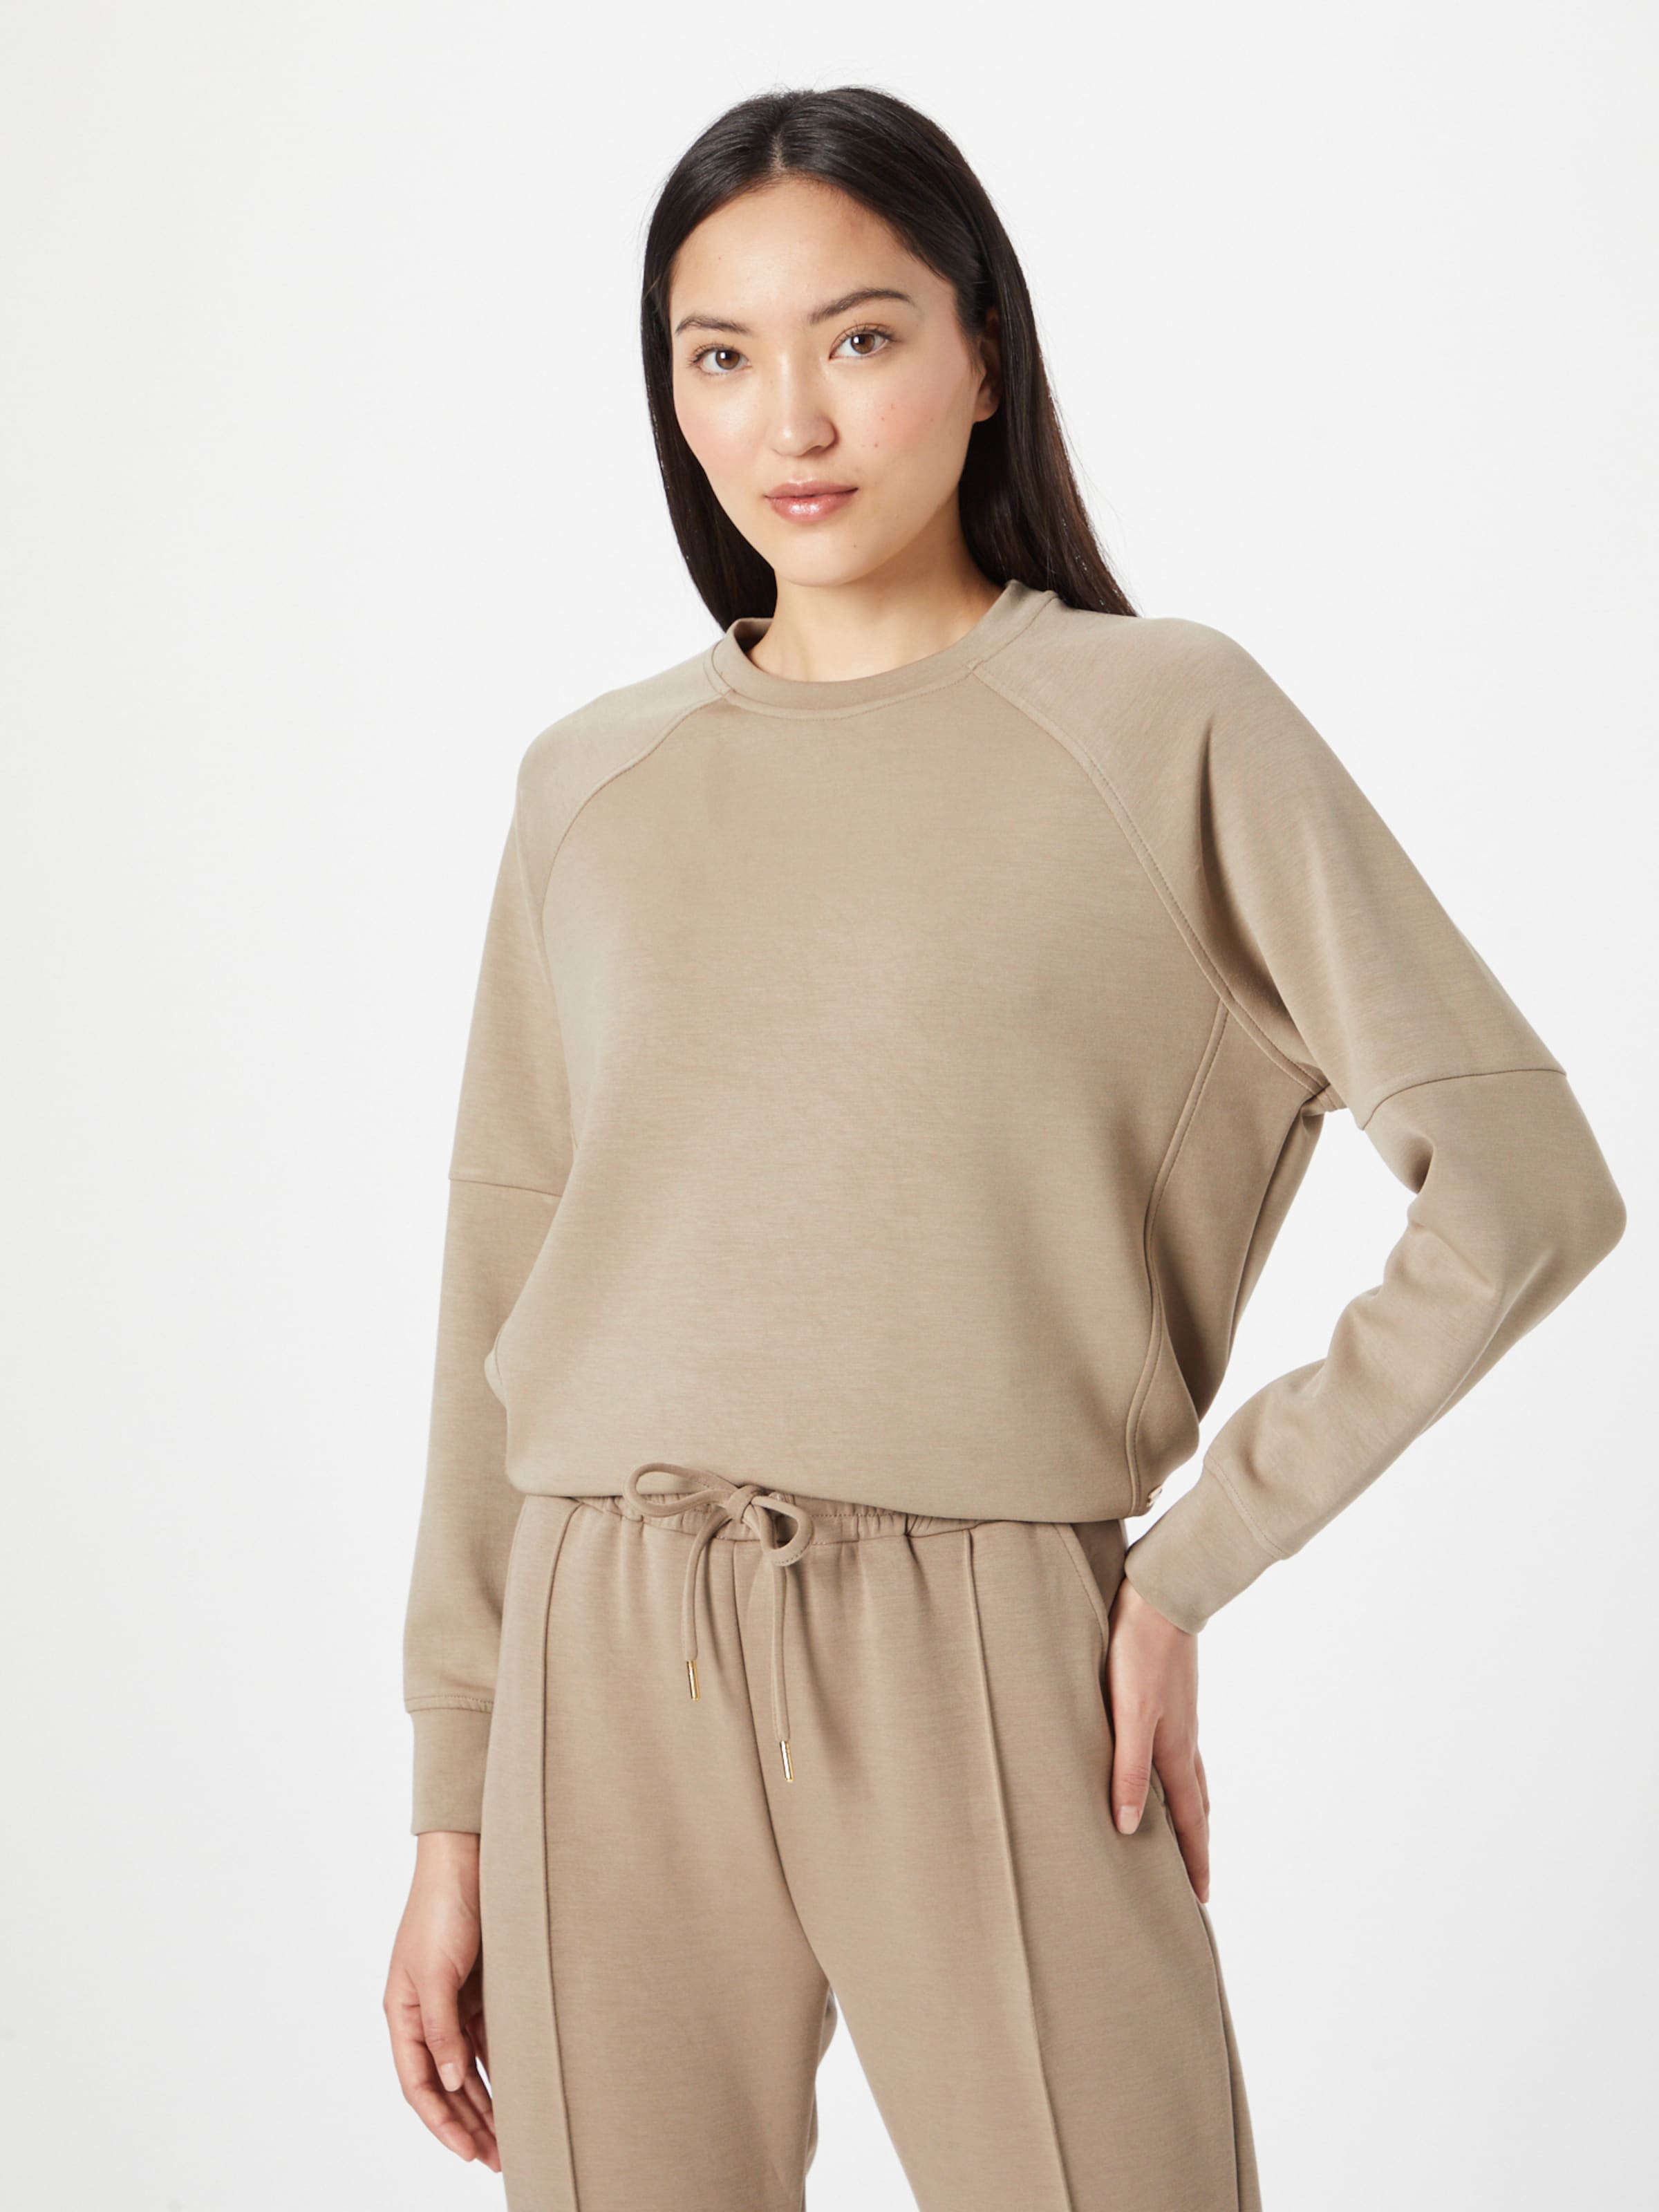 Athlecia Athletic Sweatshirt 'Jacey' in Taupe | ABOUT YOU